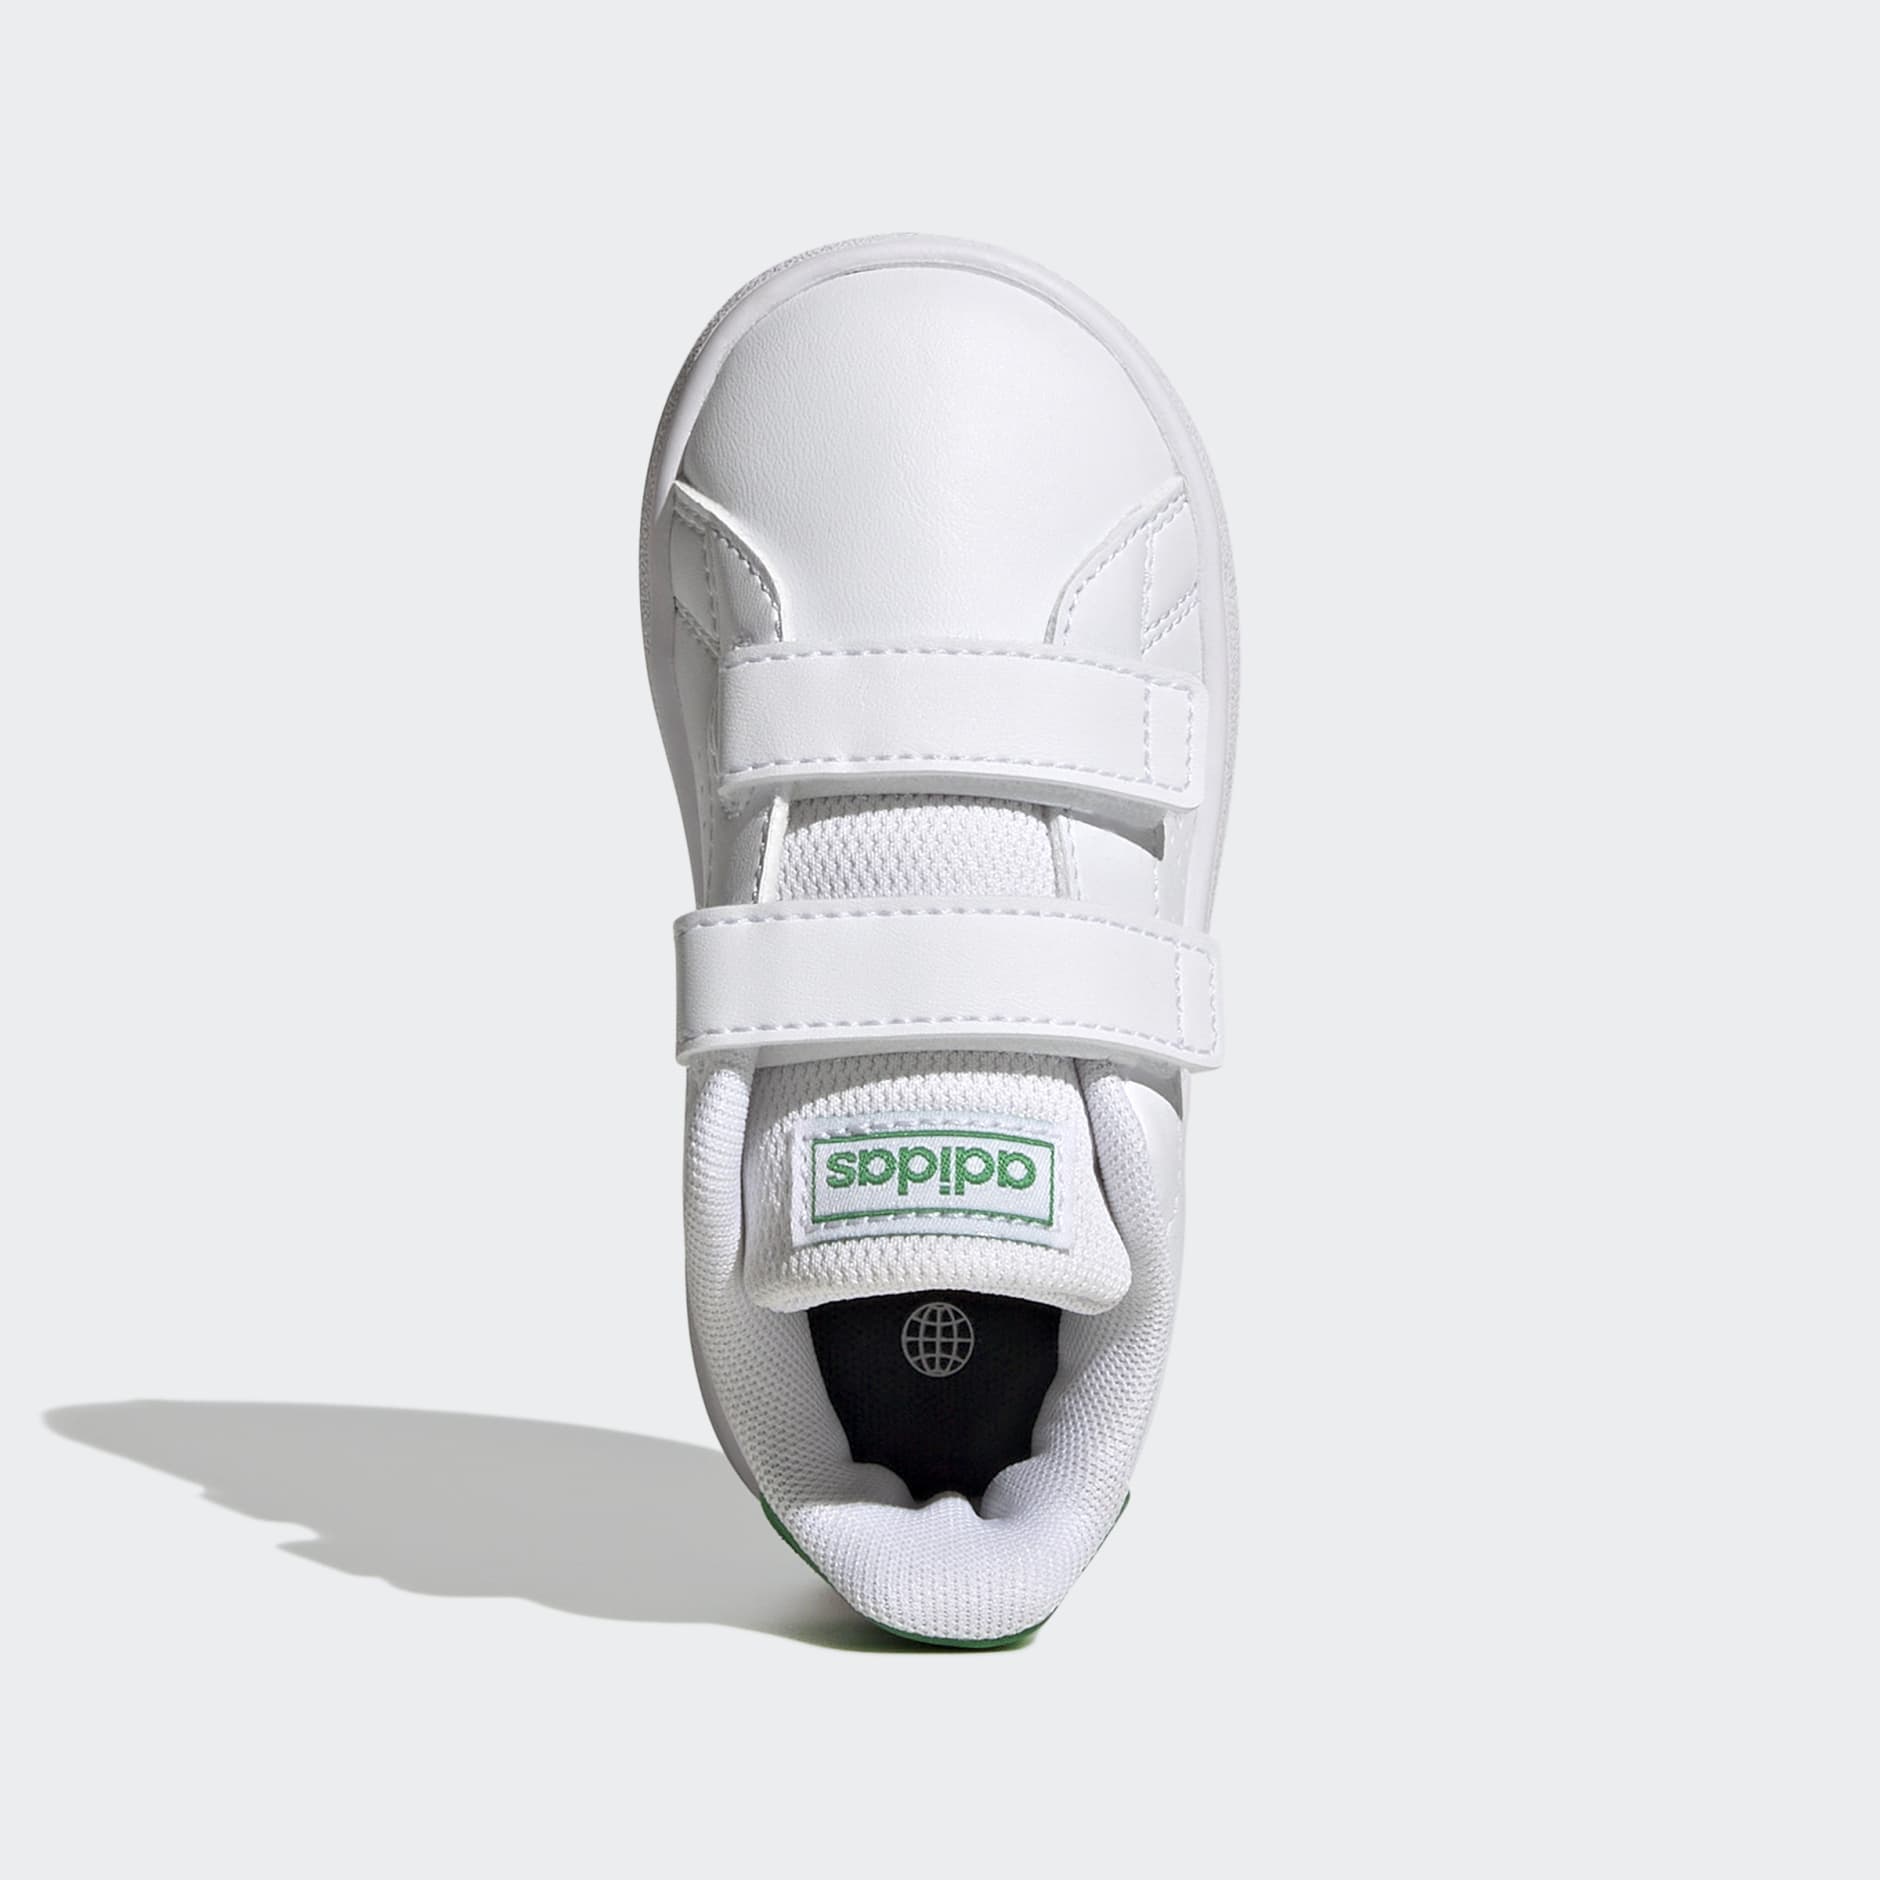 adidas Advantage Lifestyle Court Two Hook-and-Loop Shoes - White | adidas LK